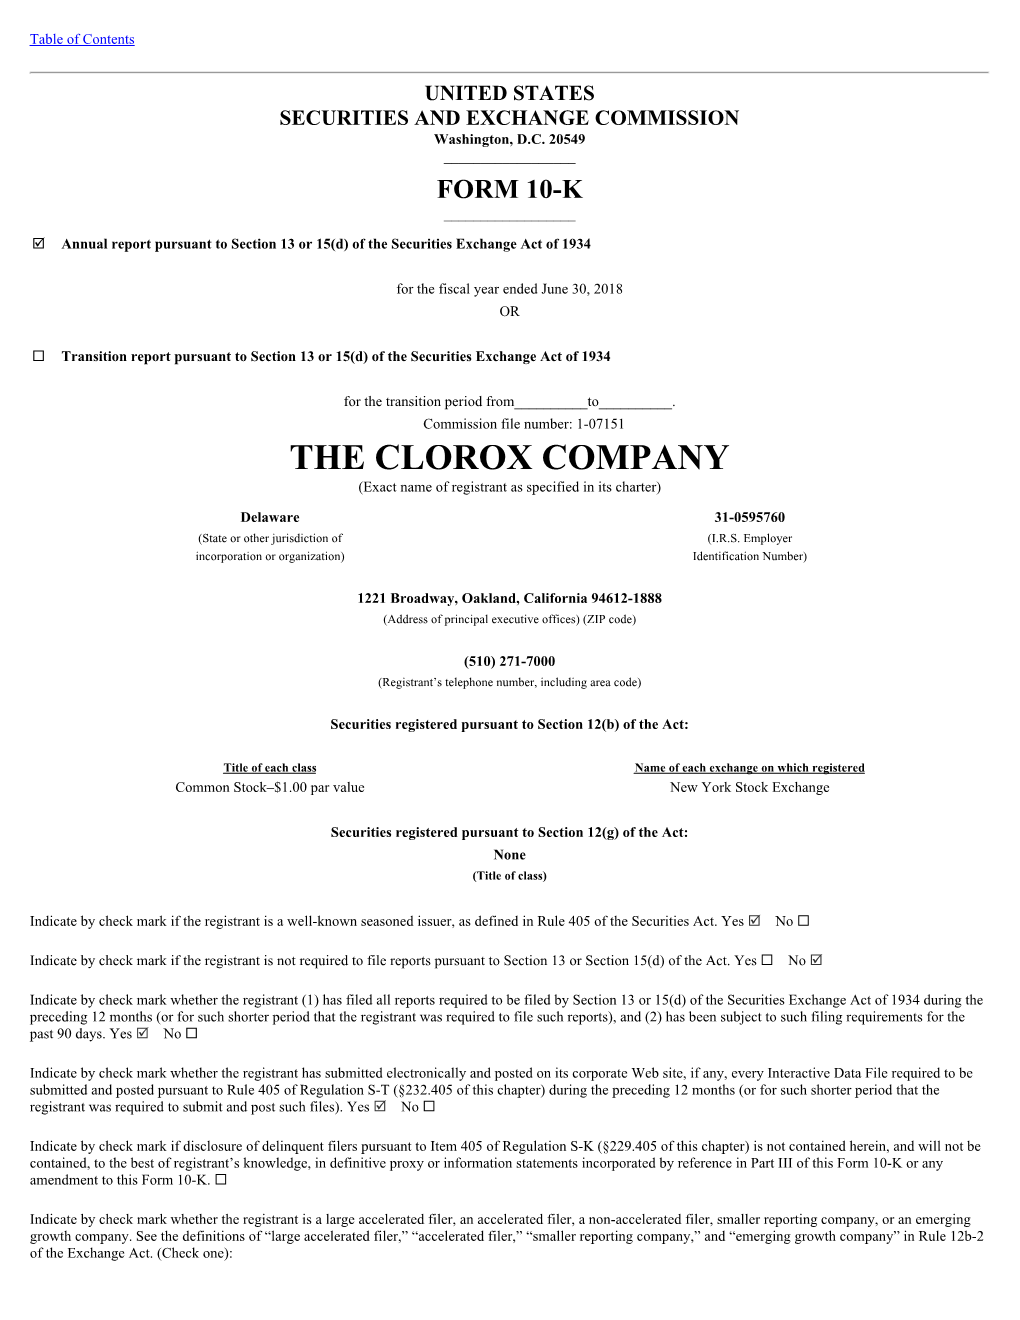 THE CLOROX COMPANY (Exact Name of Registrant As Specified in Its Charter)